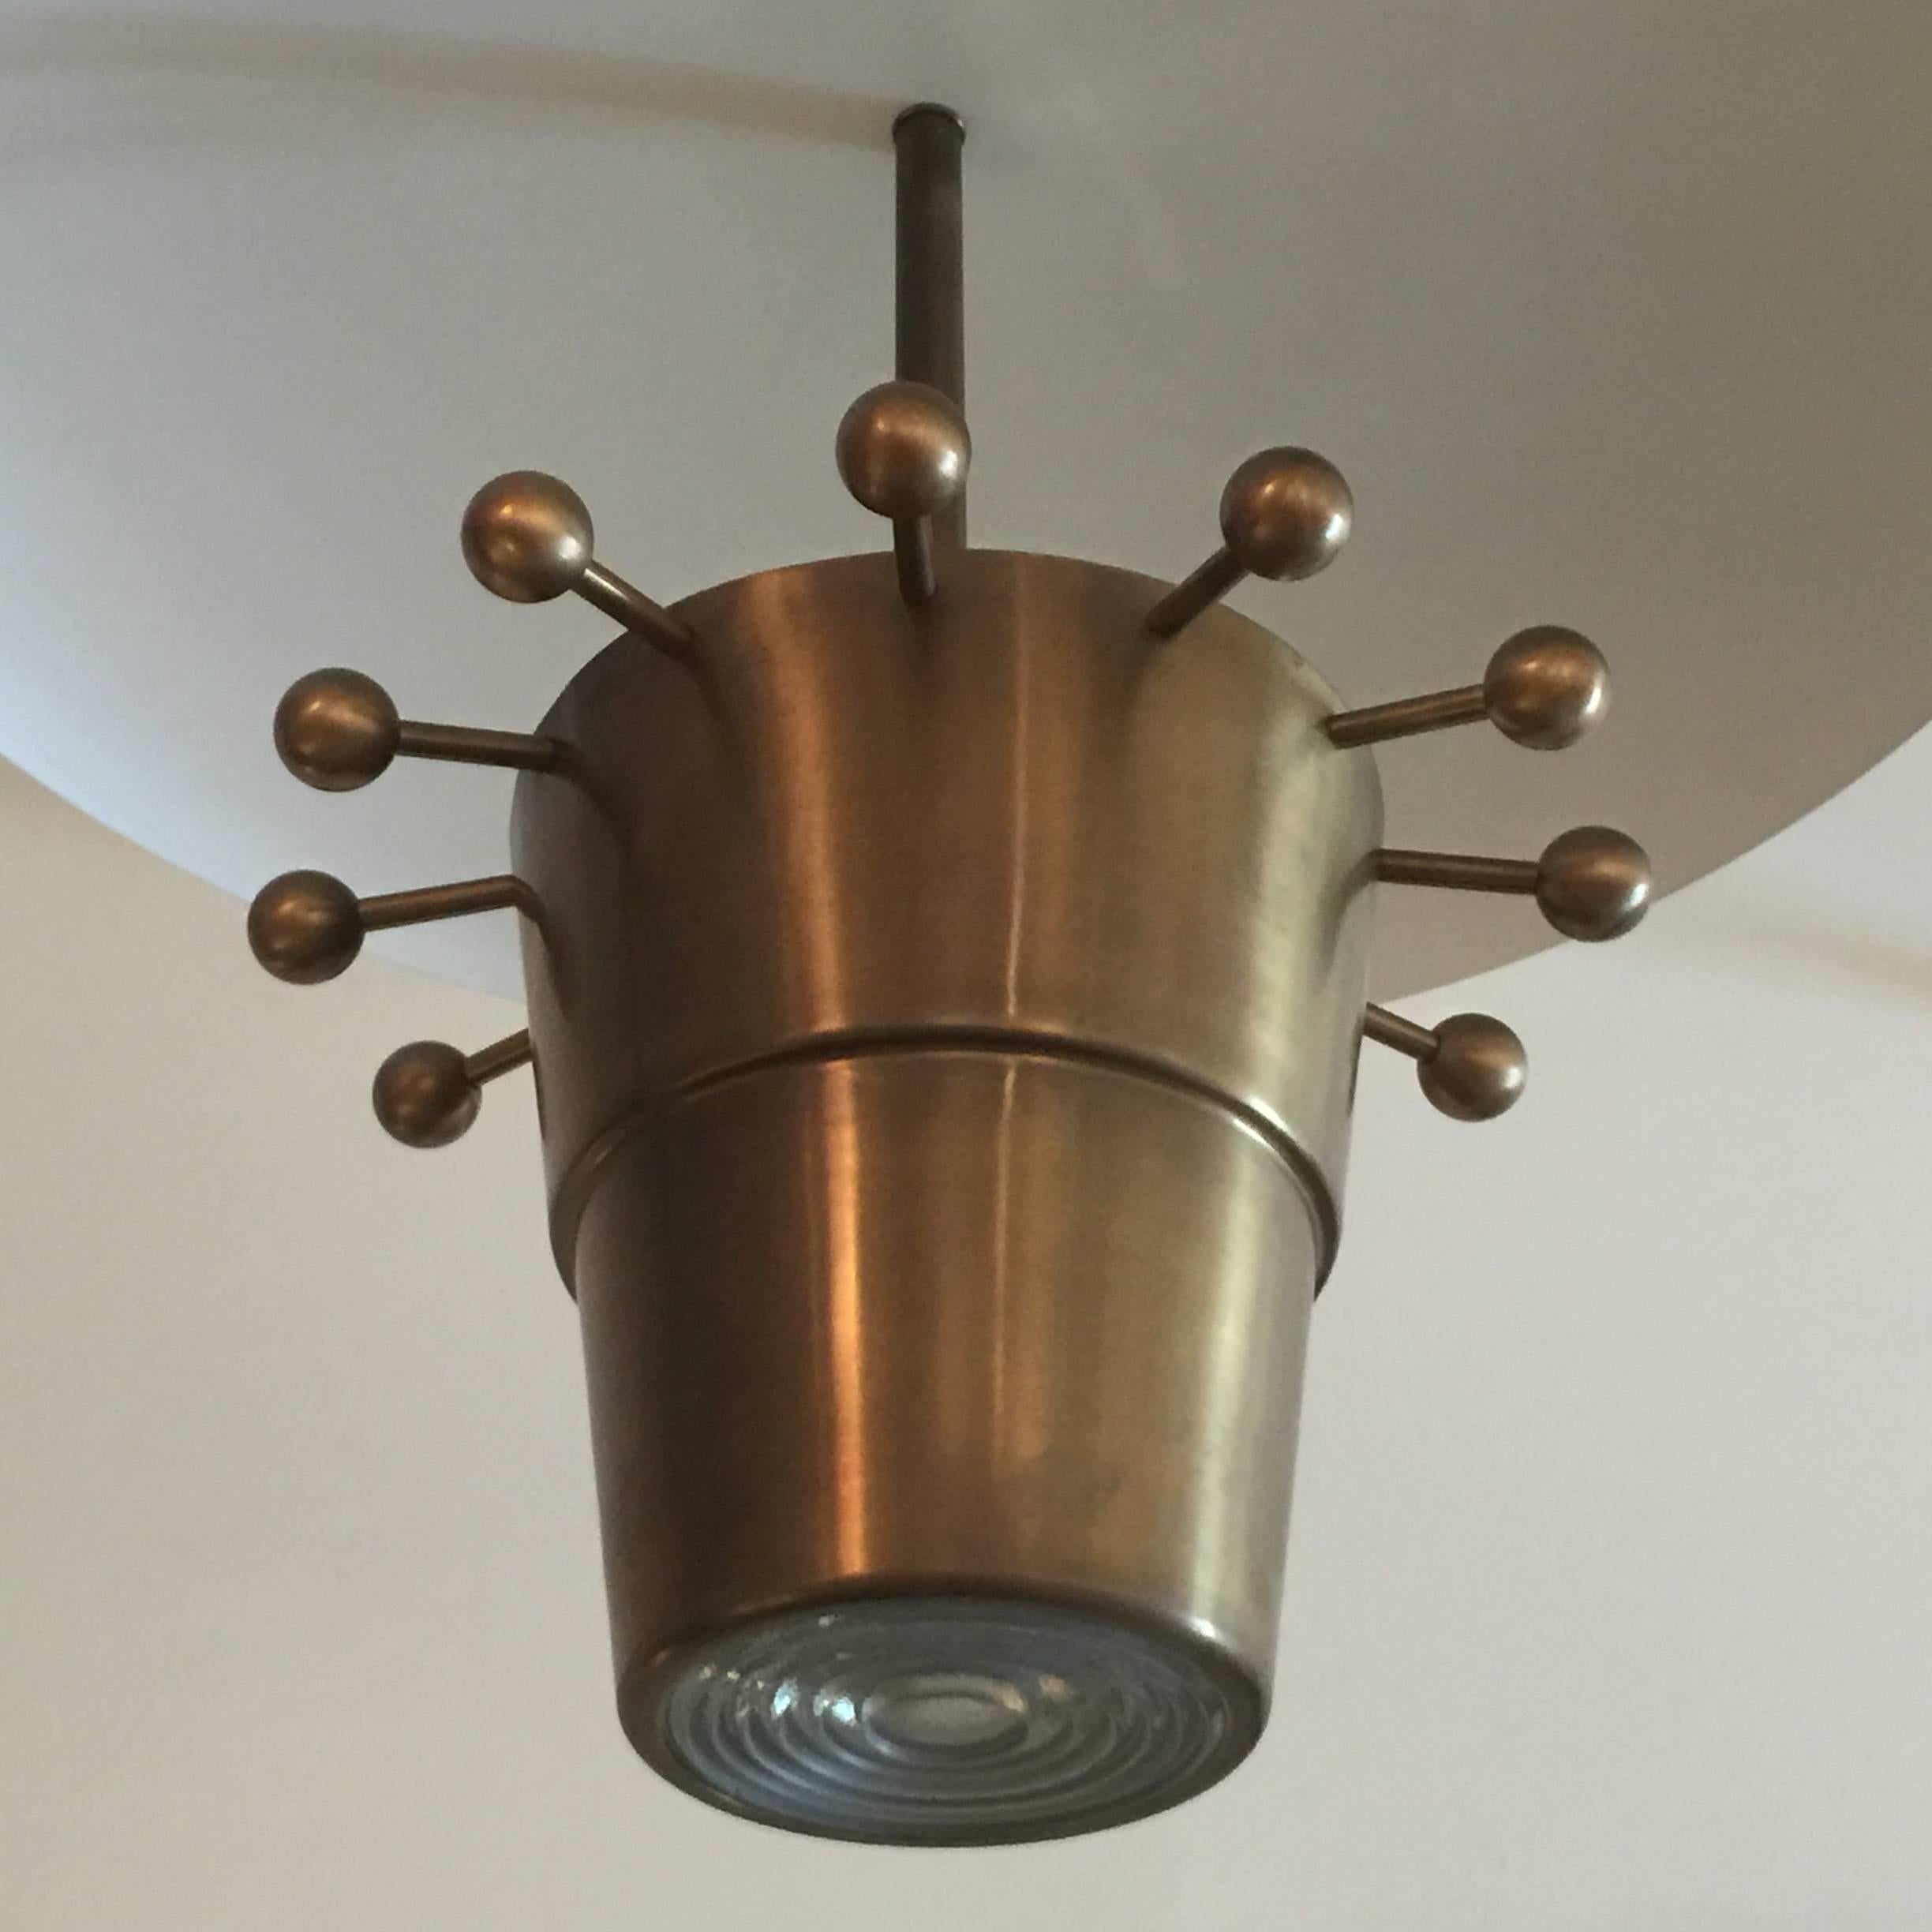 A wonderfully patinated French light fixture with bucket and dome design. Heavy ribbed glass difuser at bottom provides for a direct down-light and the dome difuser is makes a great indirect glow stream of light to the whole room. From the top of